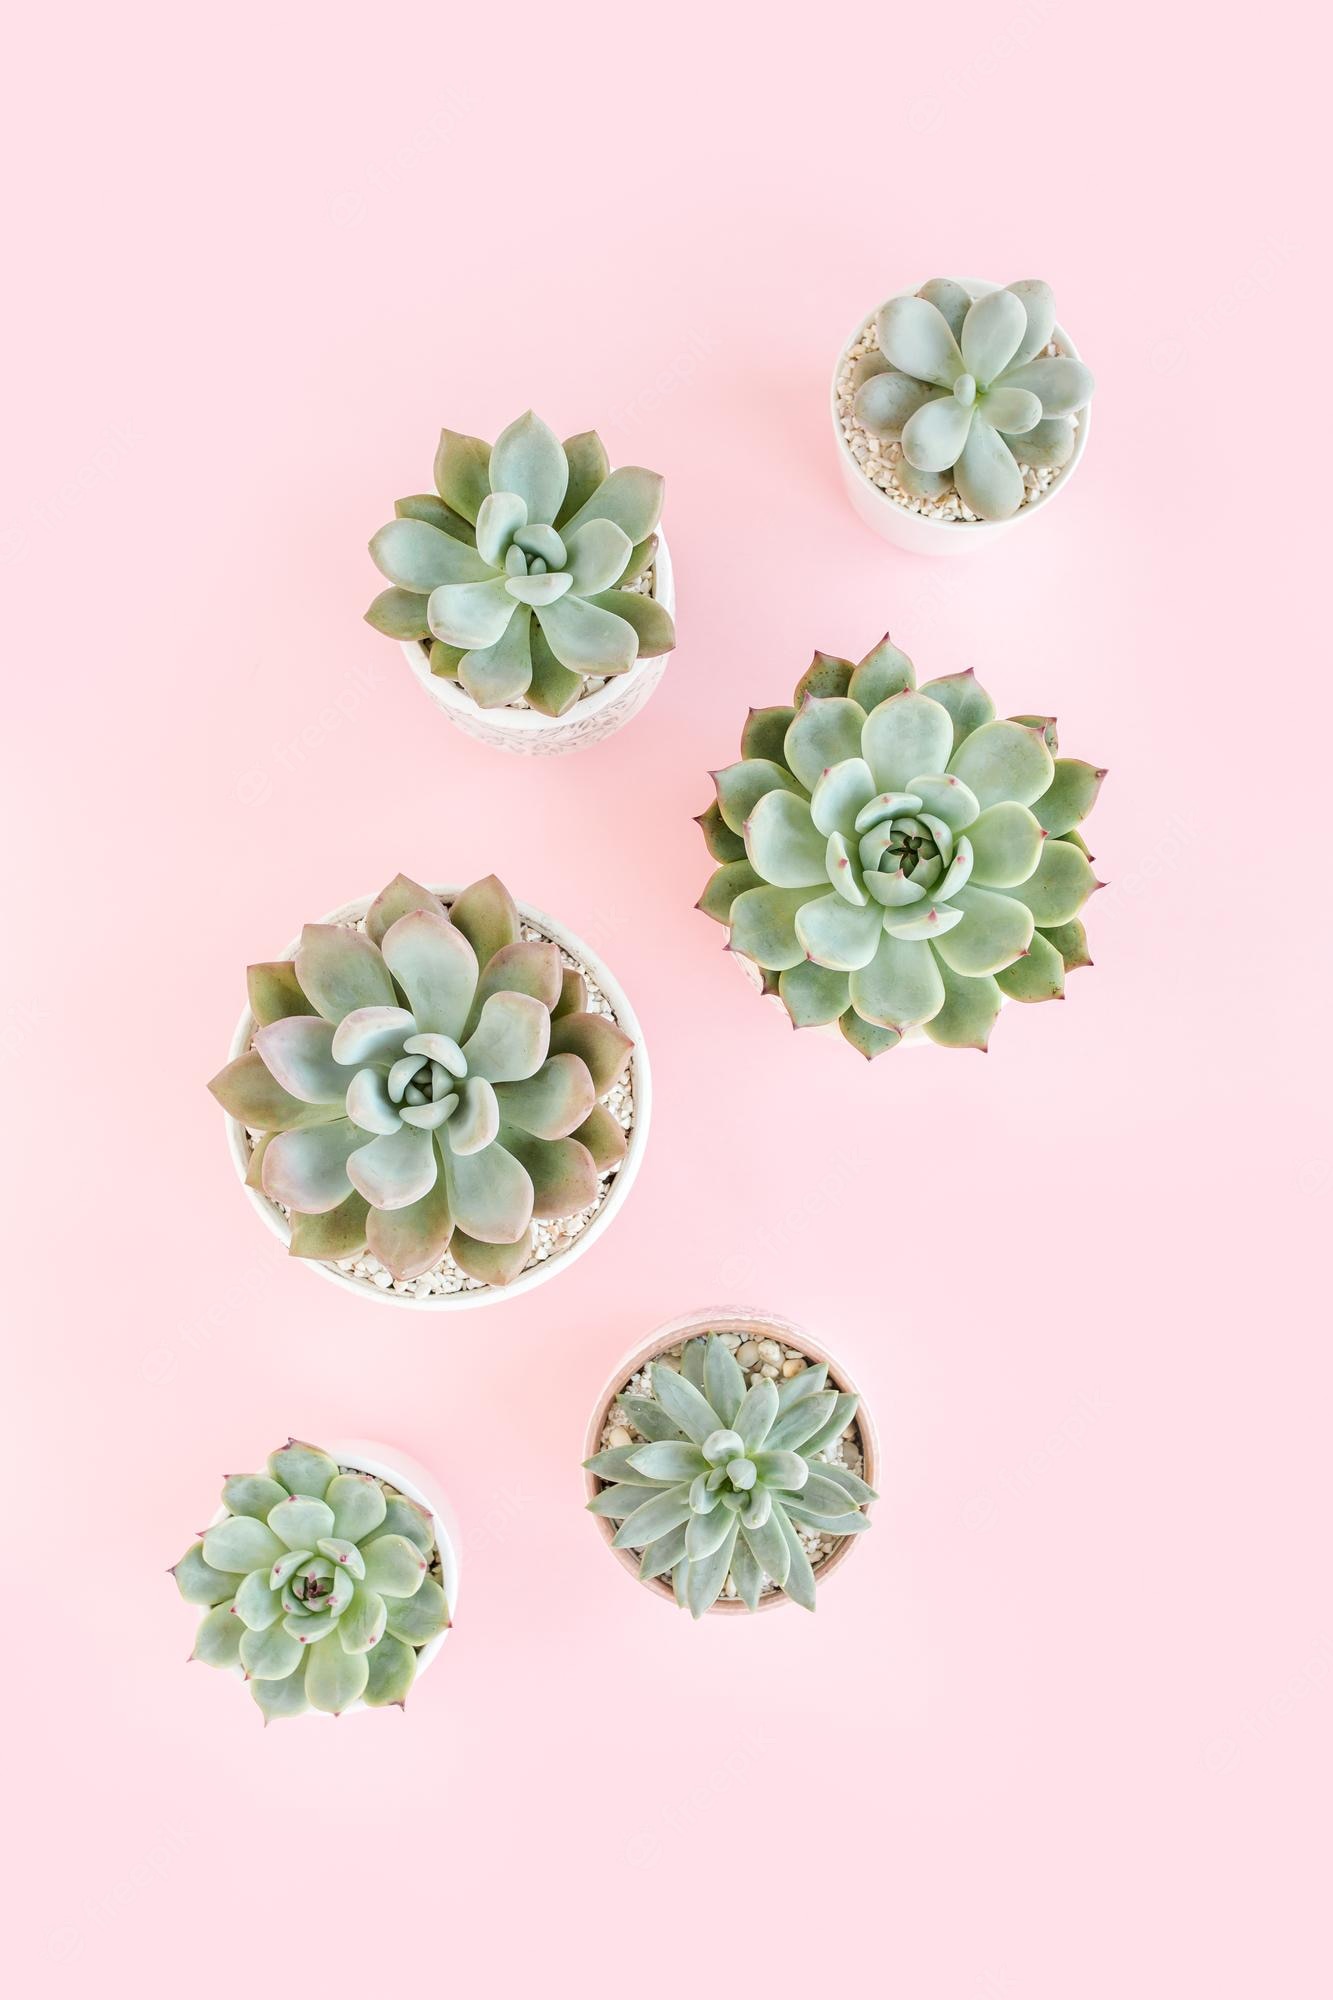 Premium Photo. Green house plants potted succulent plants isolated on pink background flat lay top view high quality photo